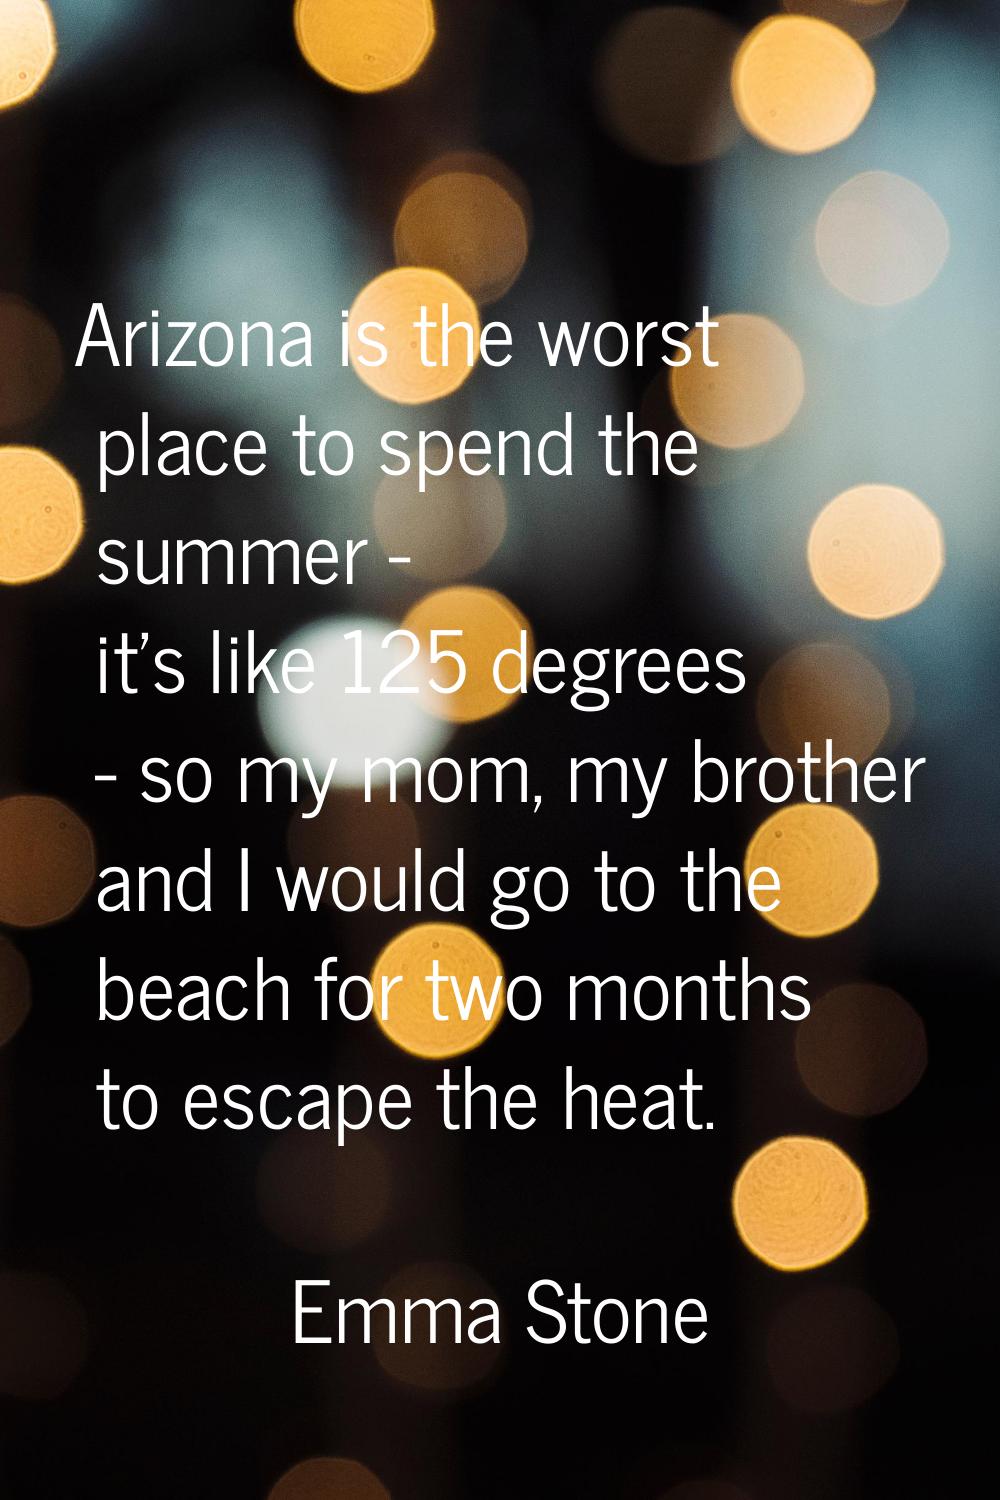 Arizona is the worst place to spend the summer - it's like 125 degrees - so my mom, my brother and 